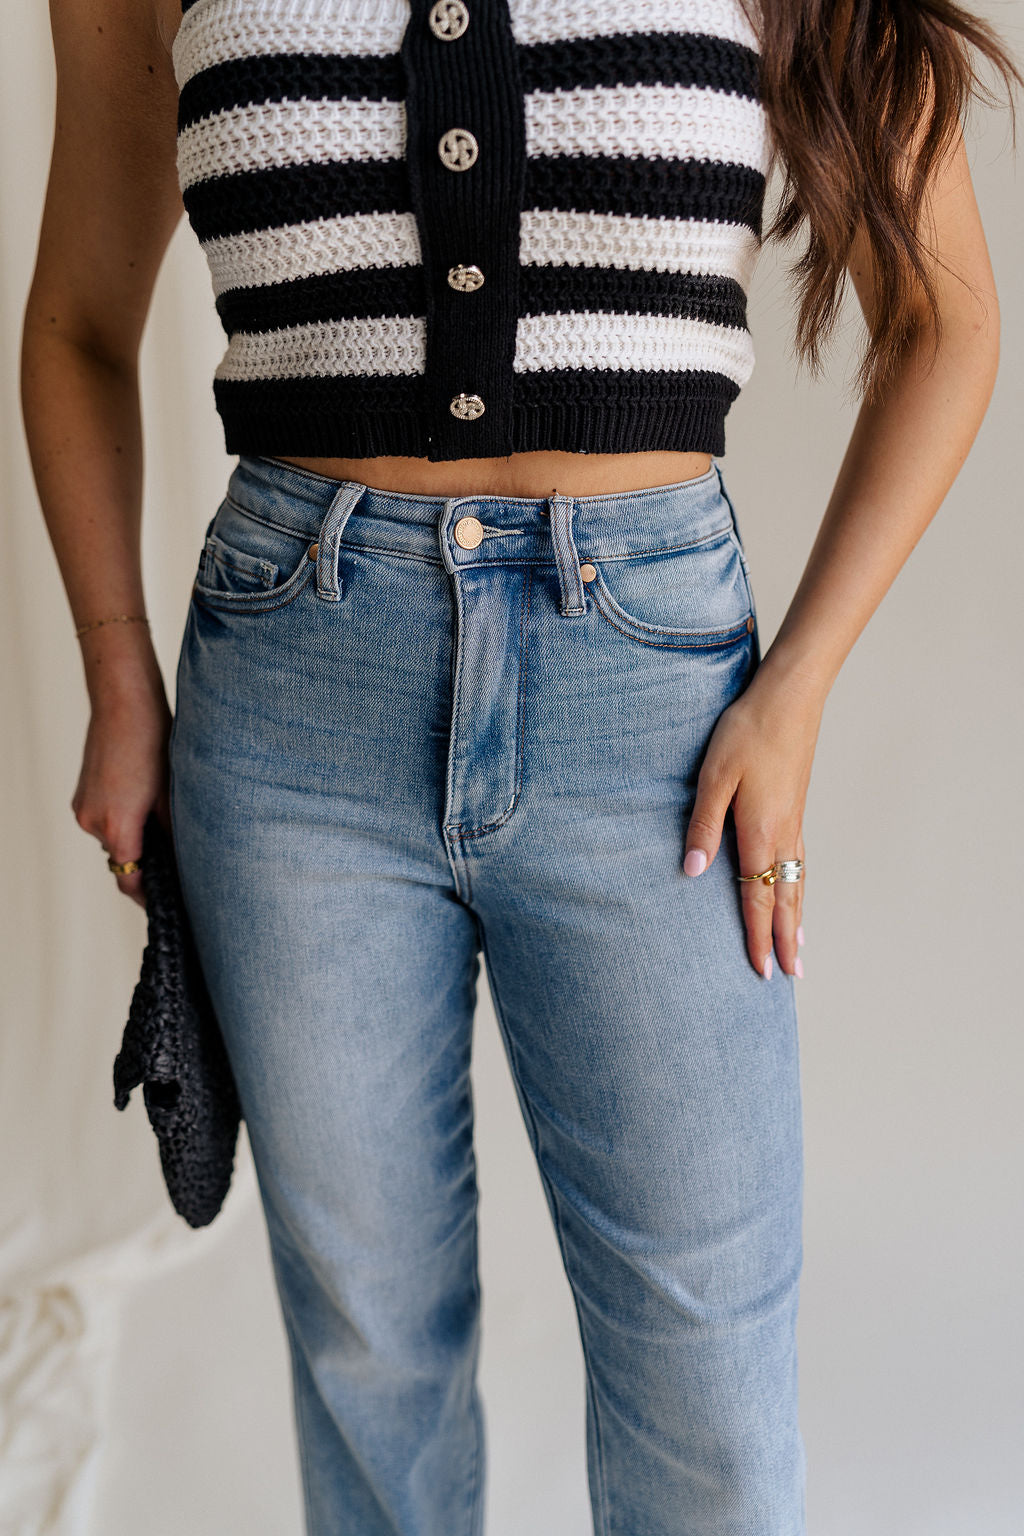 close up view of female model wearing the Eliana Medium Wash Straight Leg Jeans which features Medium Wash Denim Fabric, Straight Leg, High Waist, Two Front Pockets, Two Back Pockets, Front Zipper with Button Closure and Belt Loops